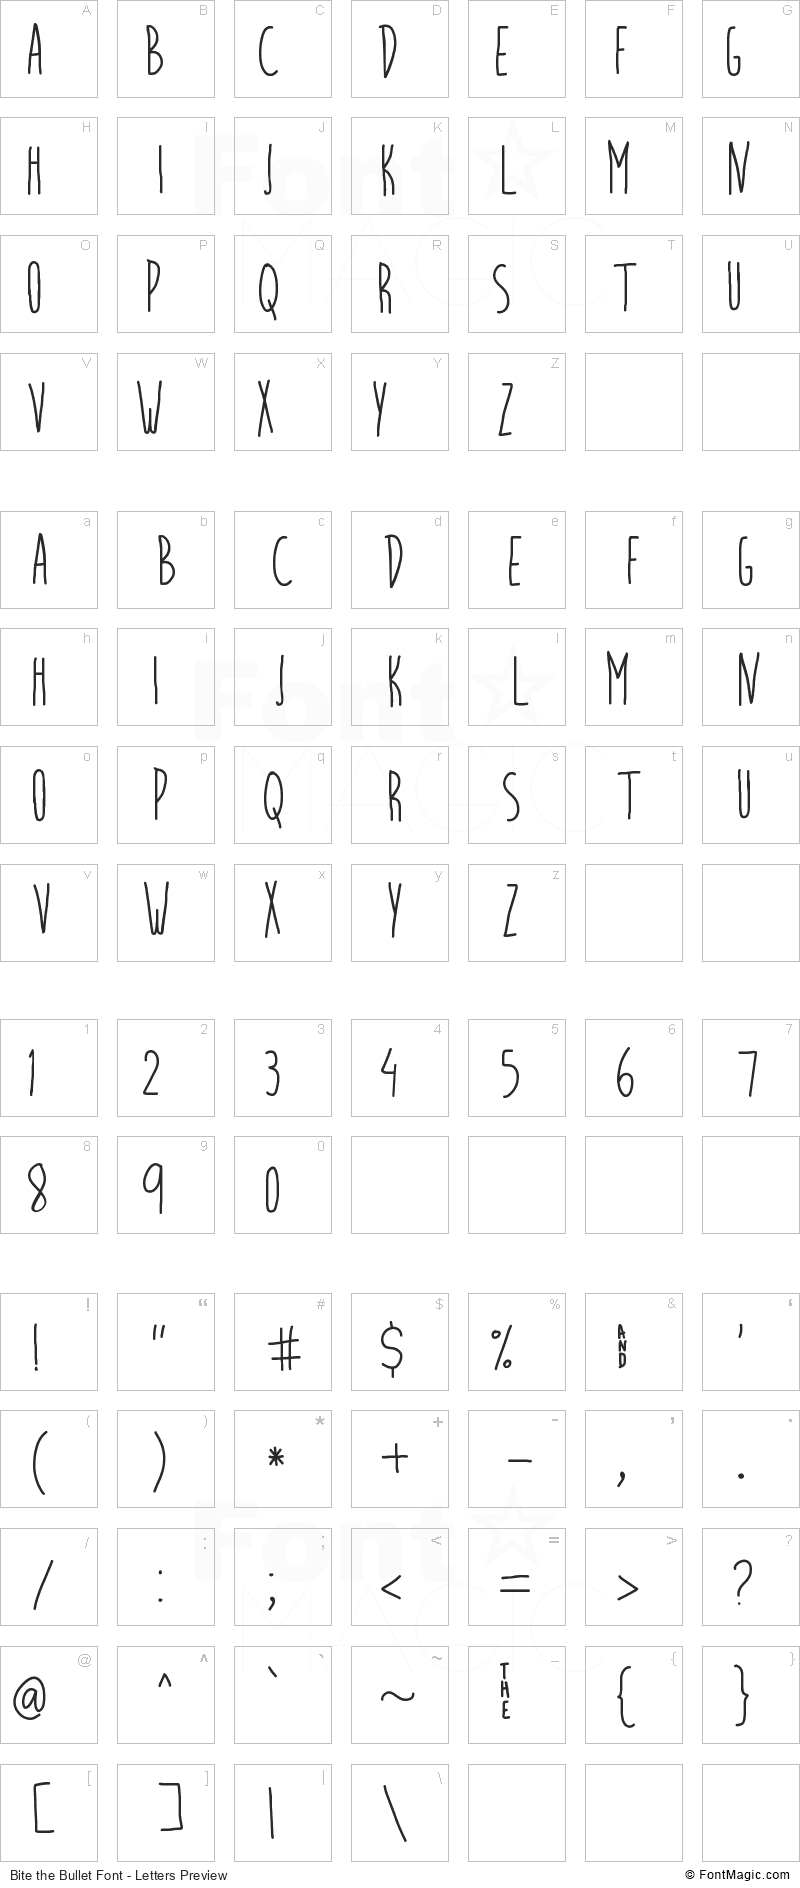 Bite the Bullet Font - All Latters Preview Chart